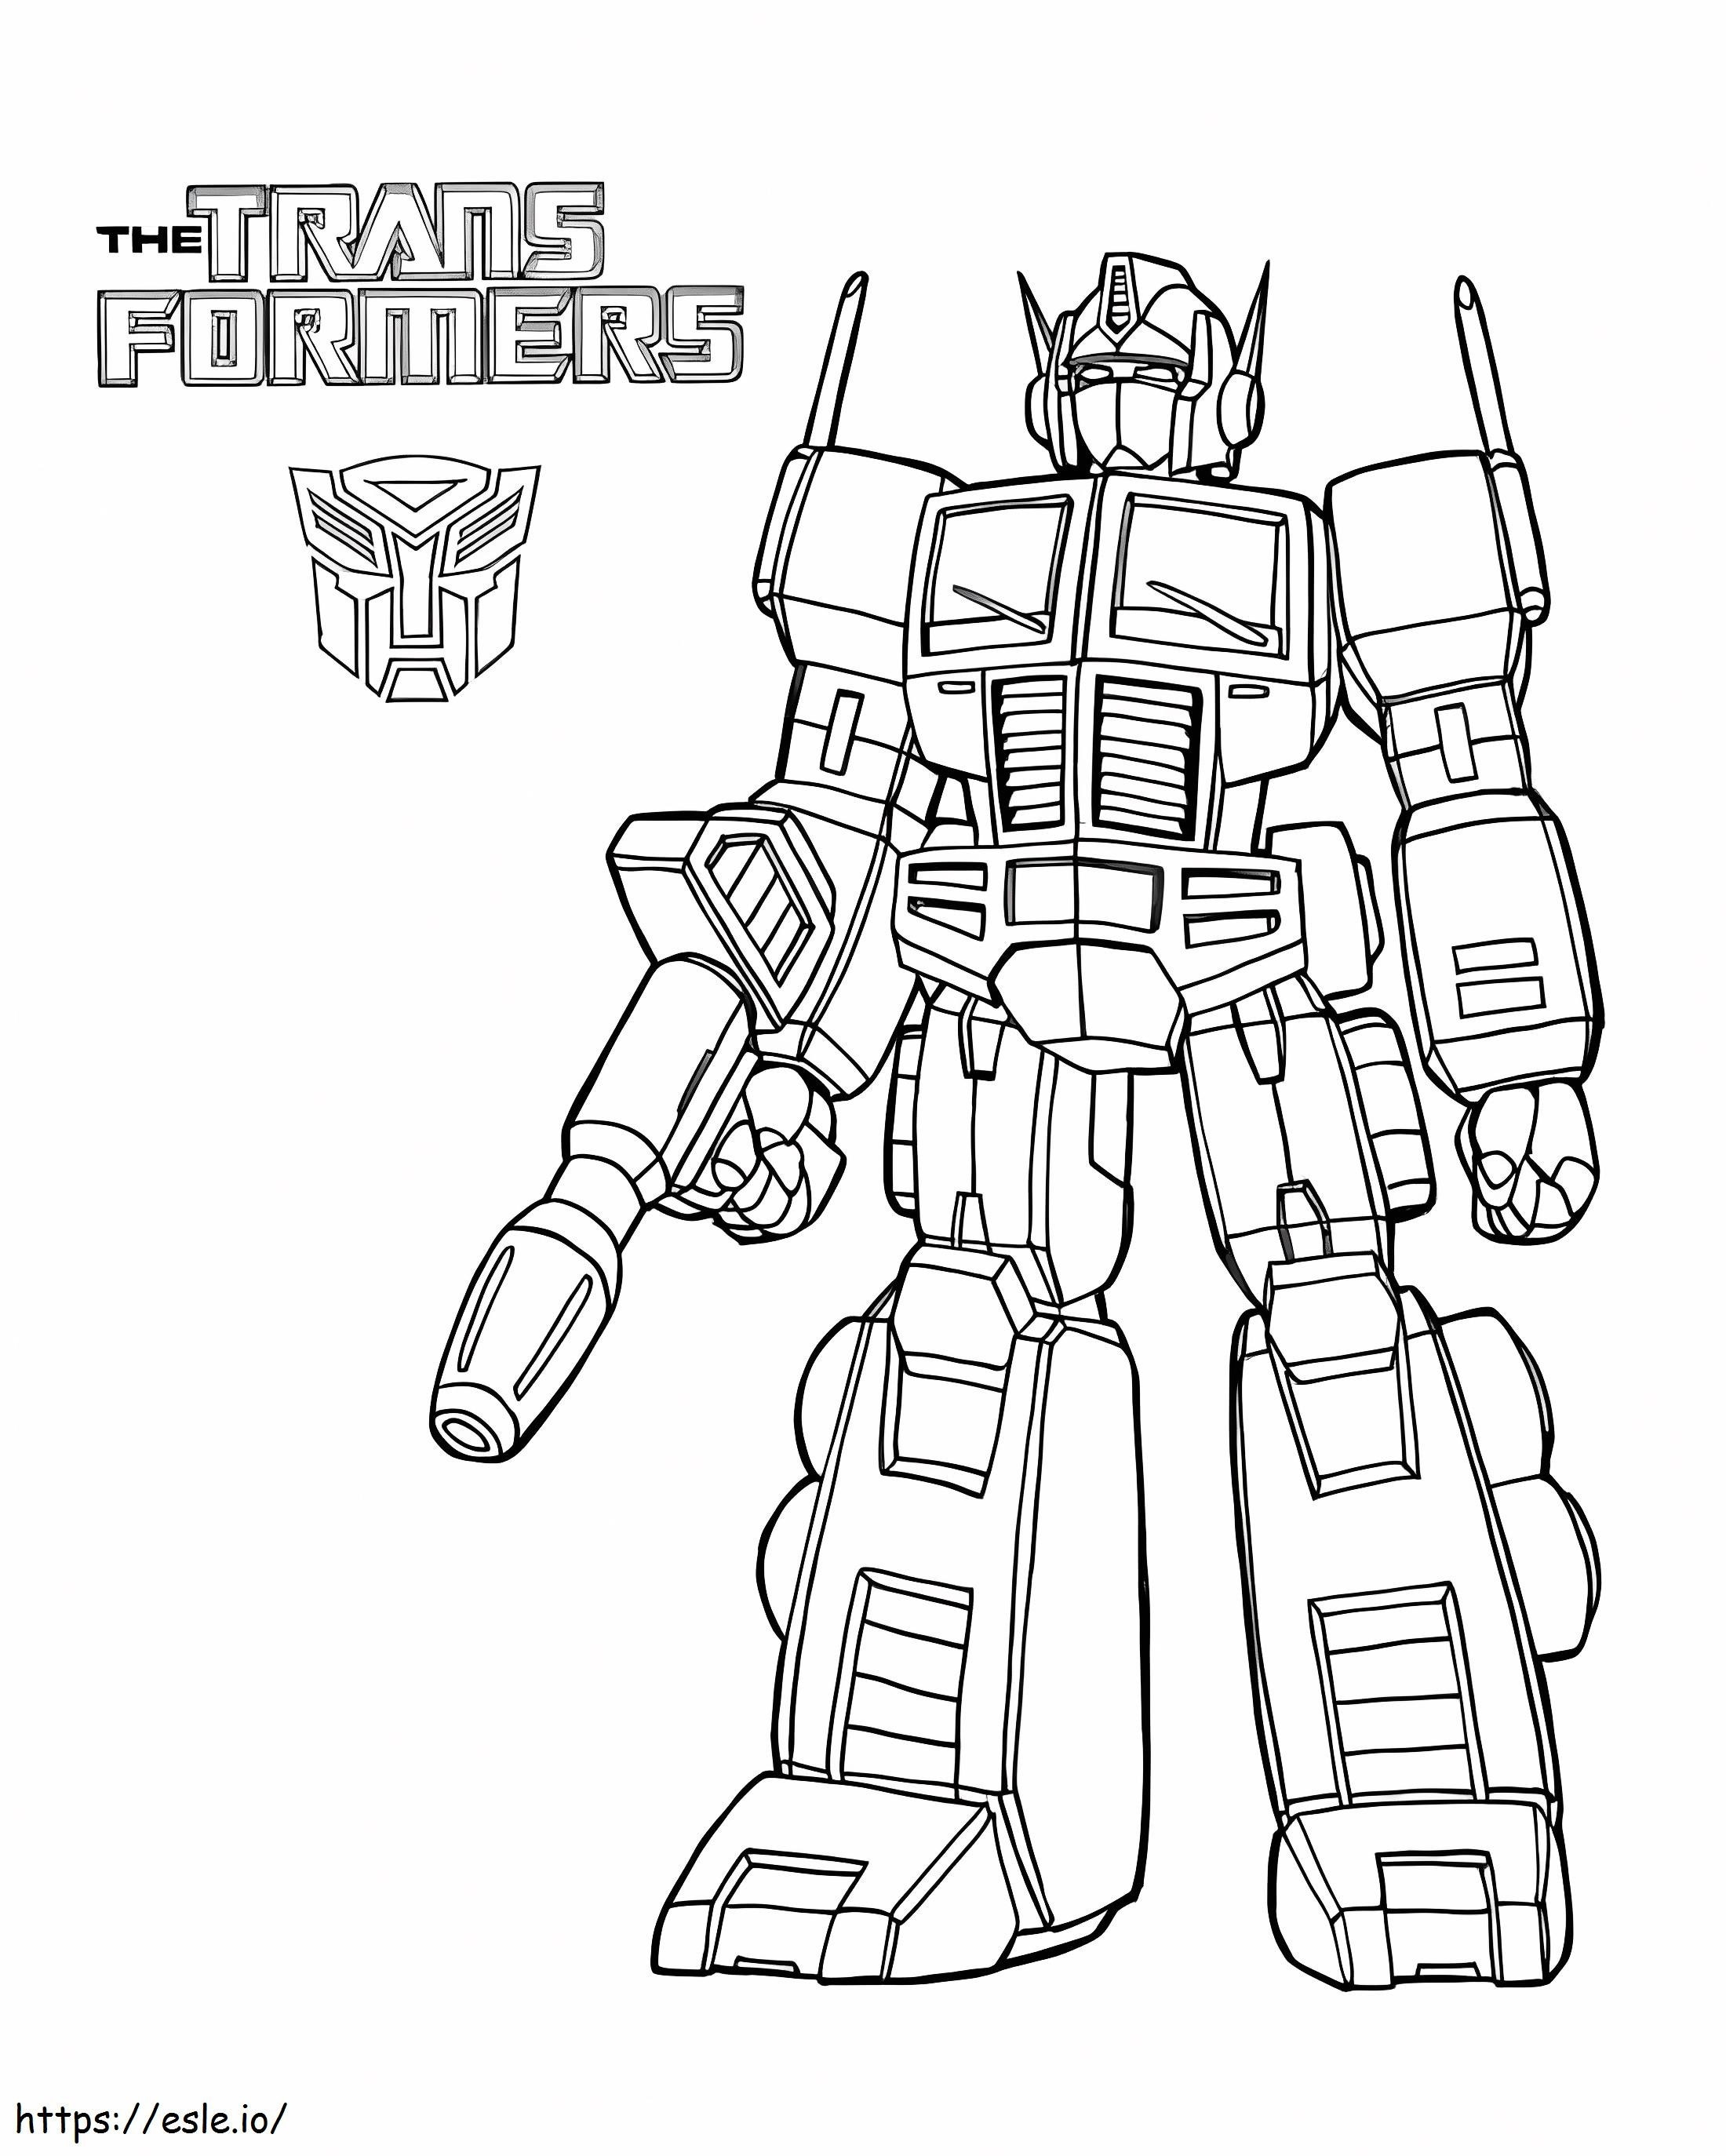 Optimus prime transformers coloring page